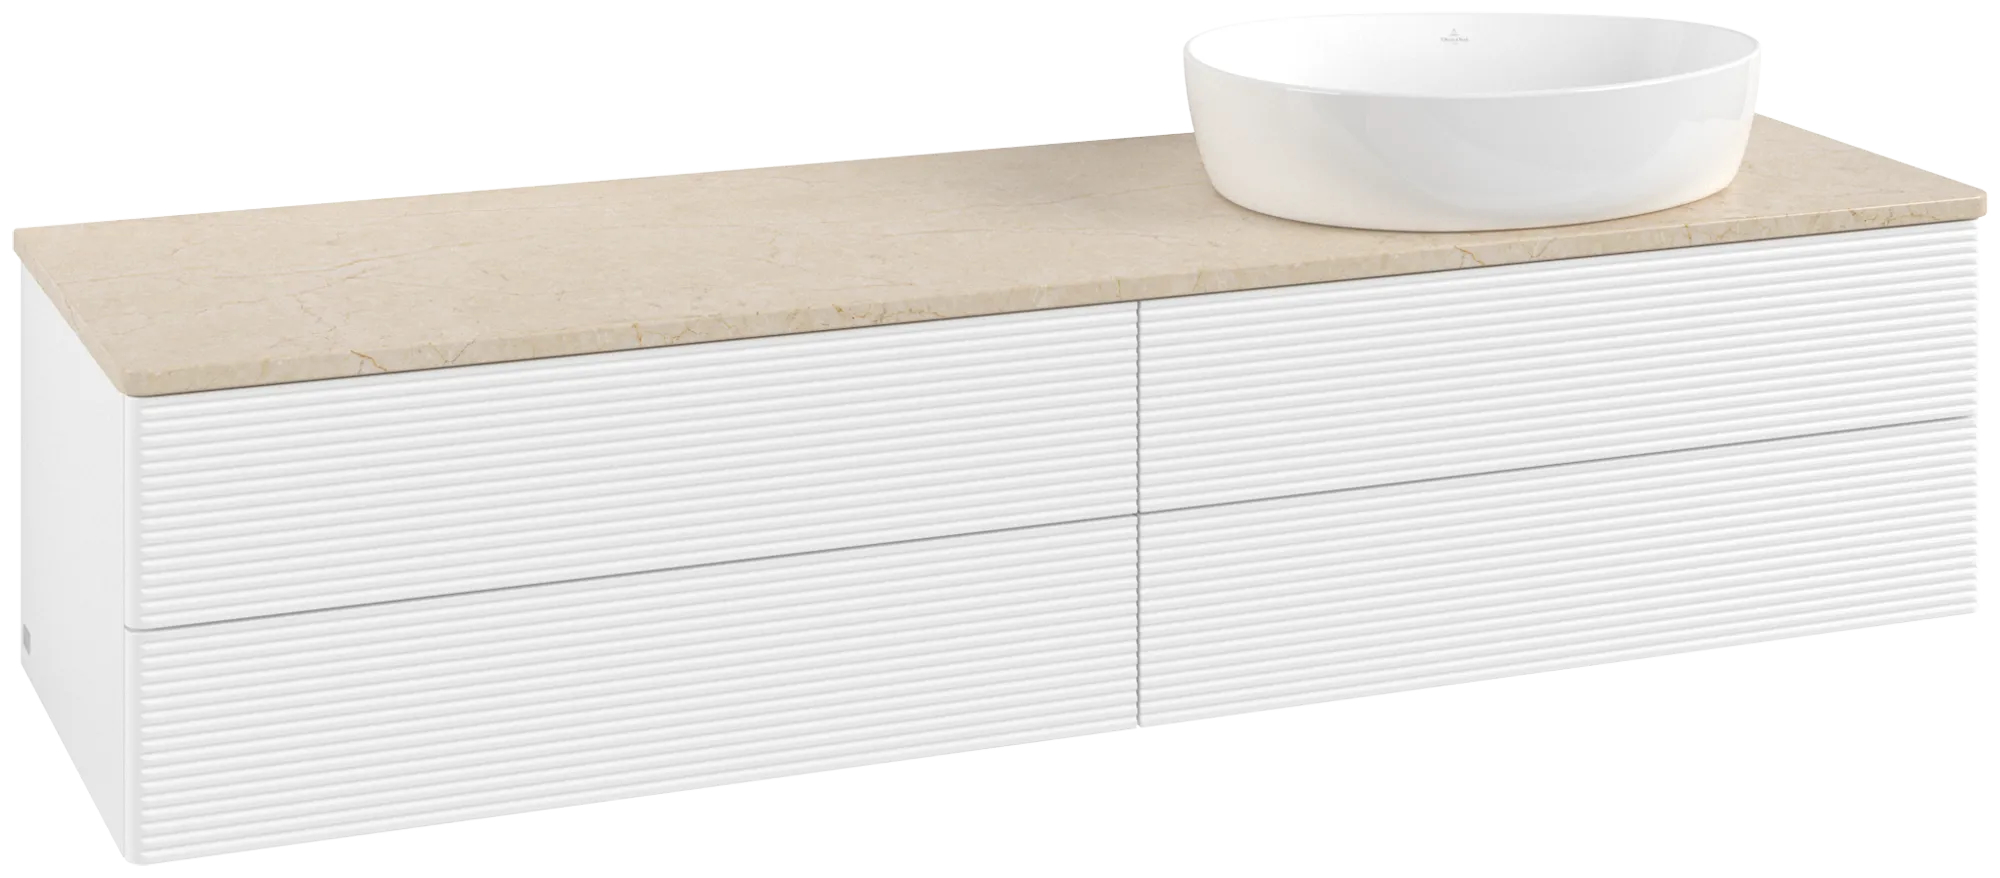 Obrázek VILLEROY BOCH Antao Vanity unit, 4 pull-out compartments, 1600 x 360 x 500 mm, Front with grain texture, White Matt Lacquer / Botticino #K27113MT